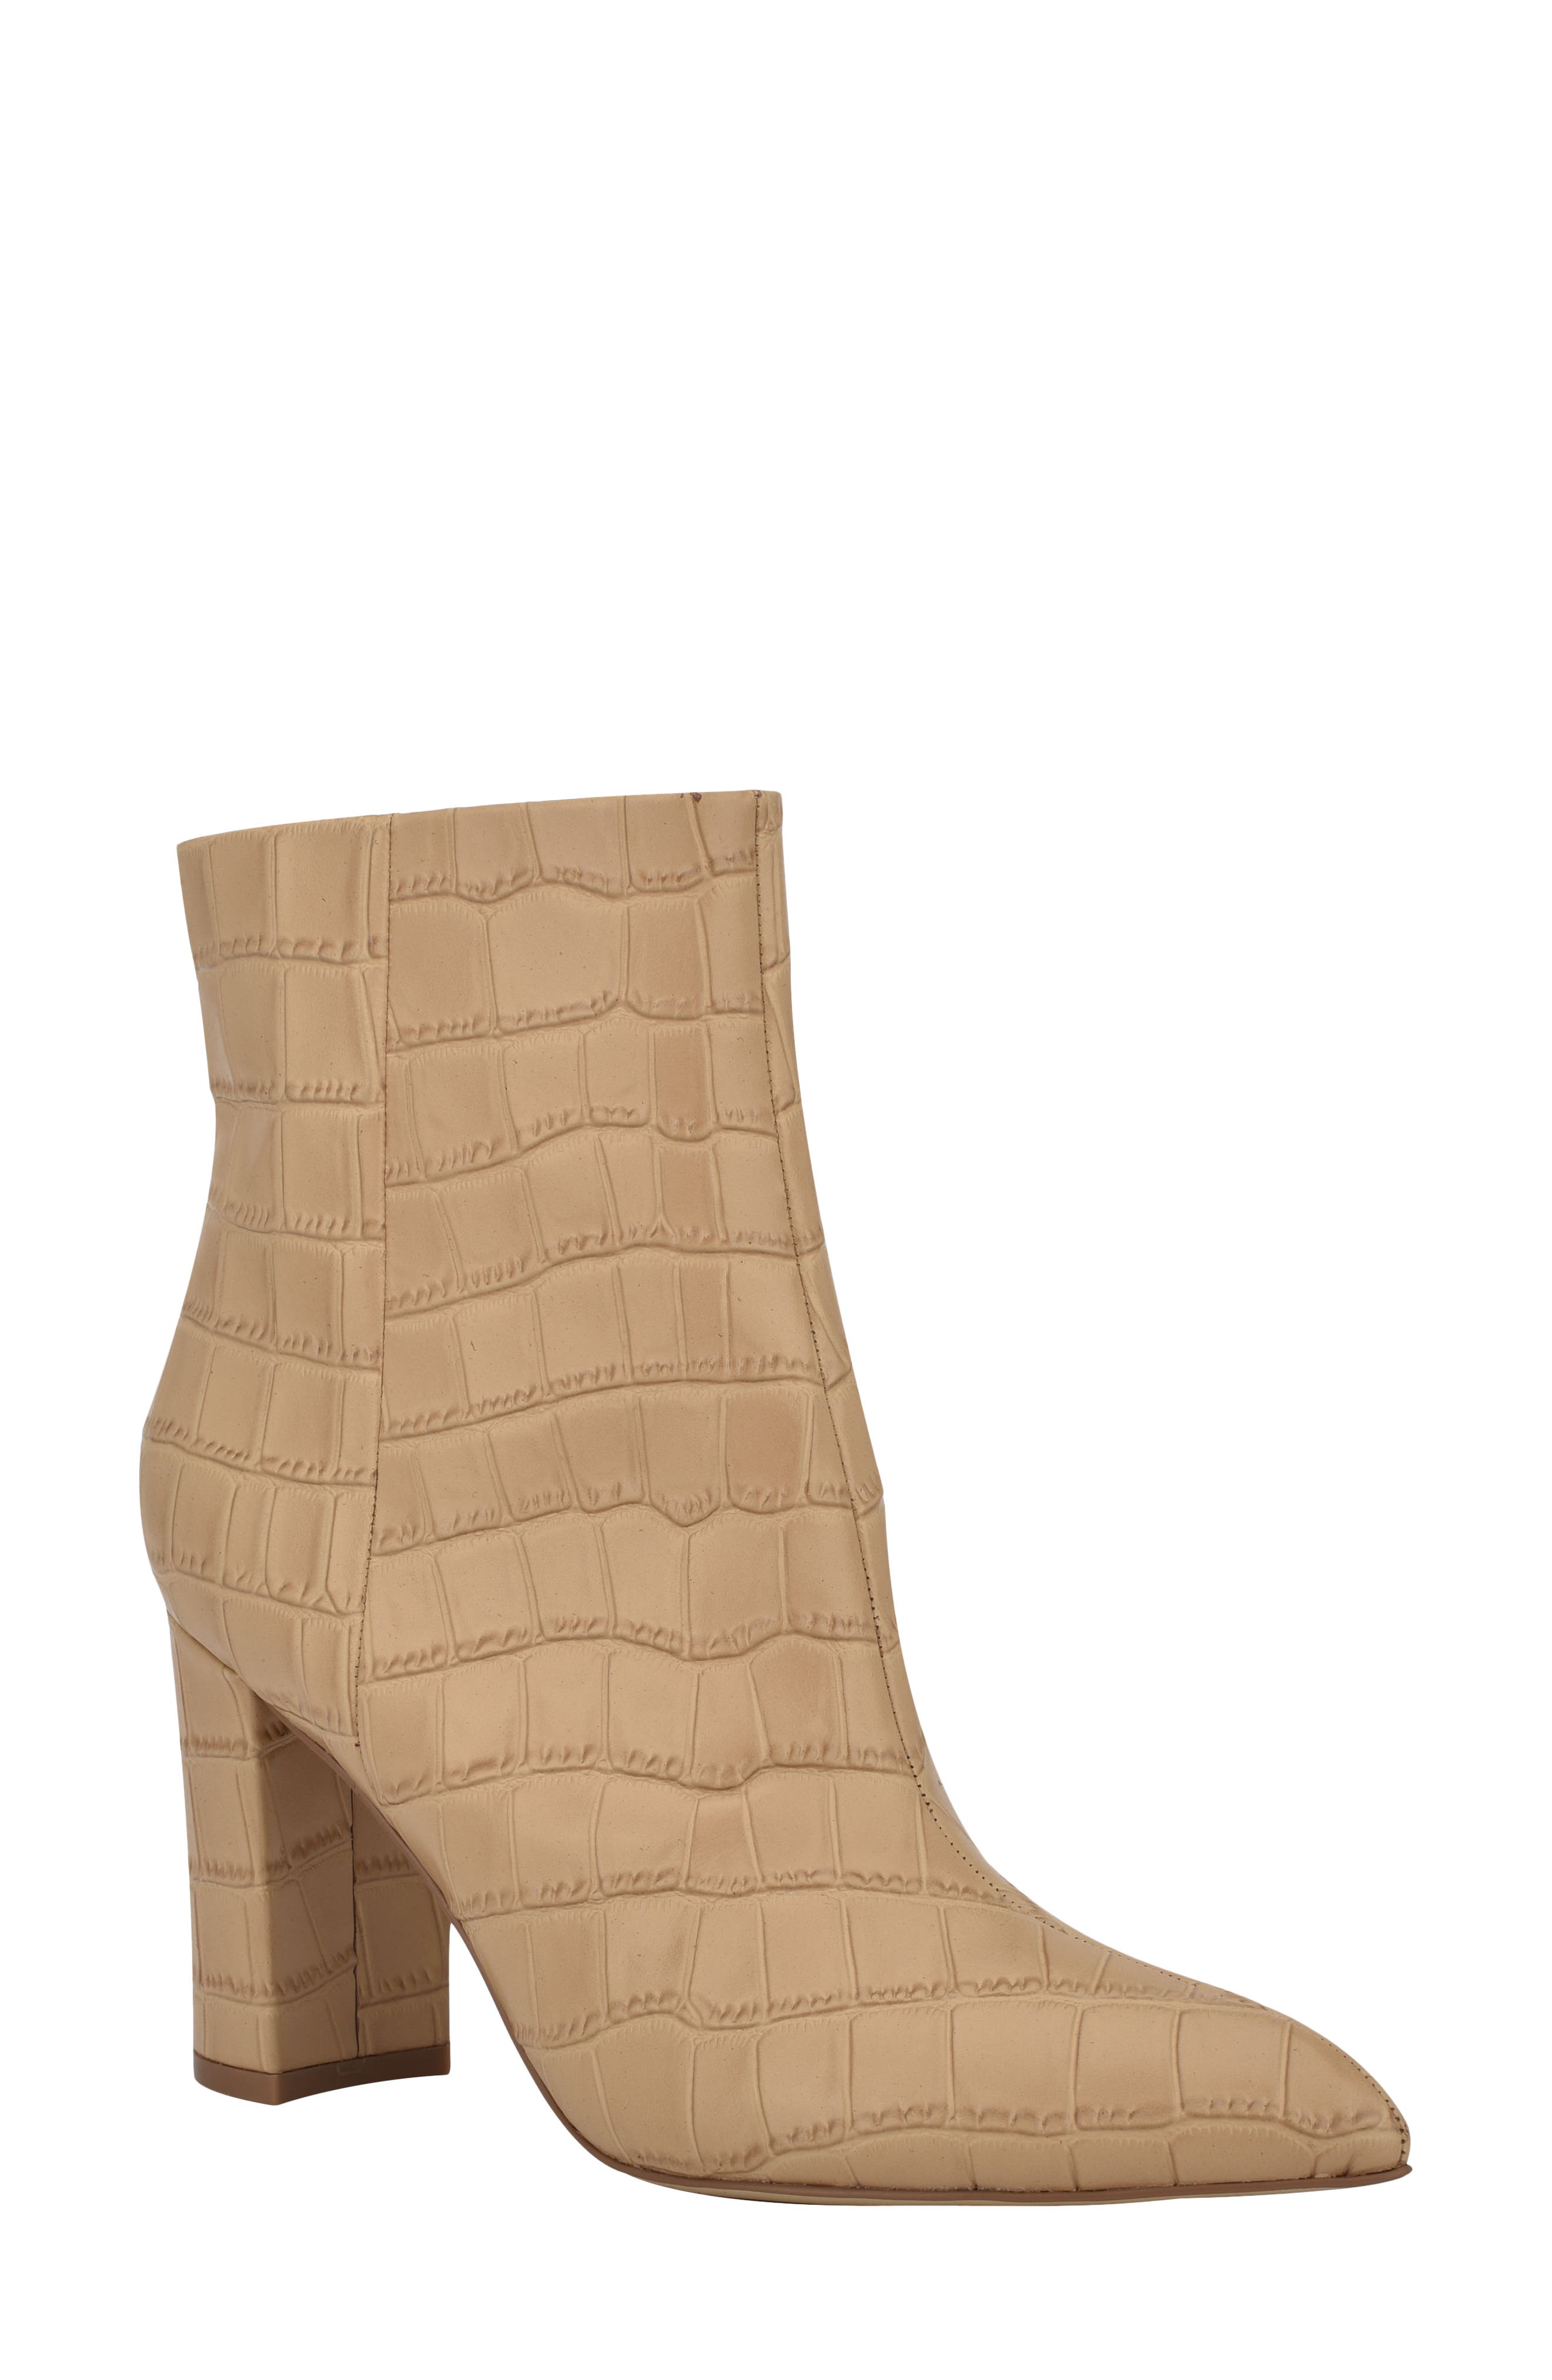 Marc Fisher Ltd Ulani Embossed Pointed Bootie In Medium Natural Leather